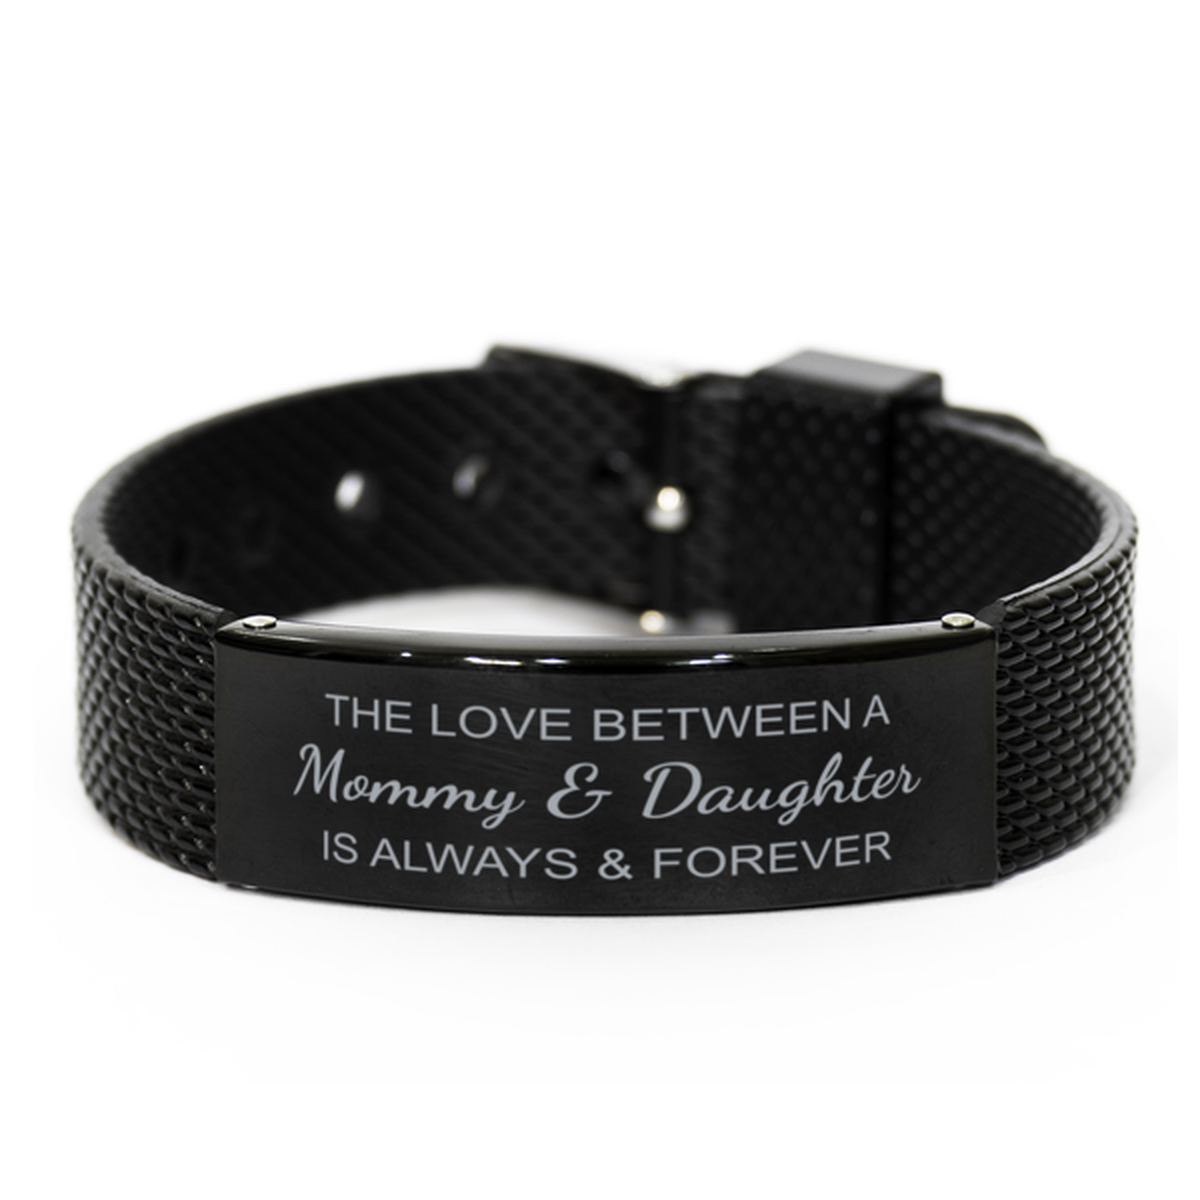 The Love Between a Mommy and Daughter is Always and Forever Bracelet, Mommy Daughter Bracelet, Black Stainless Steel Leather Bracelet, Christmas.